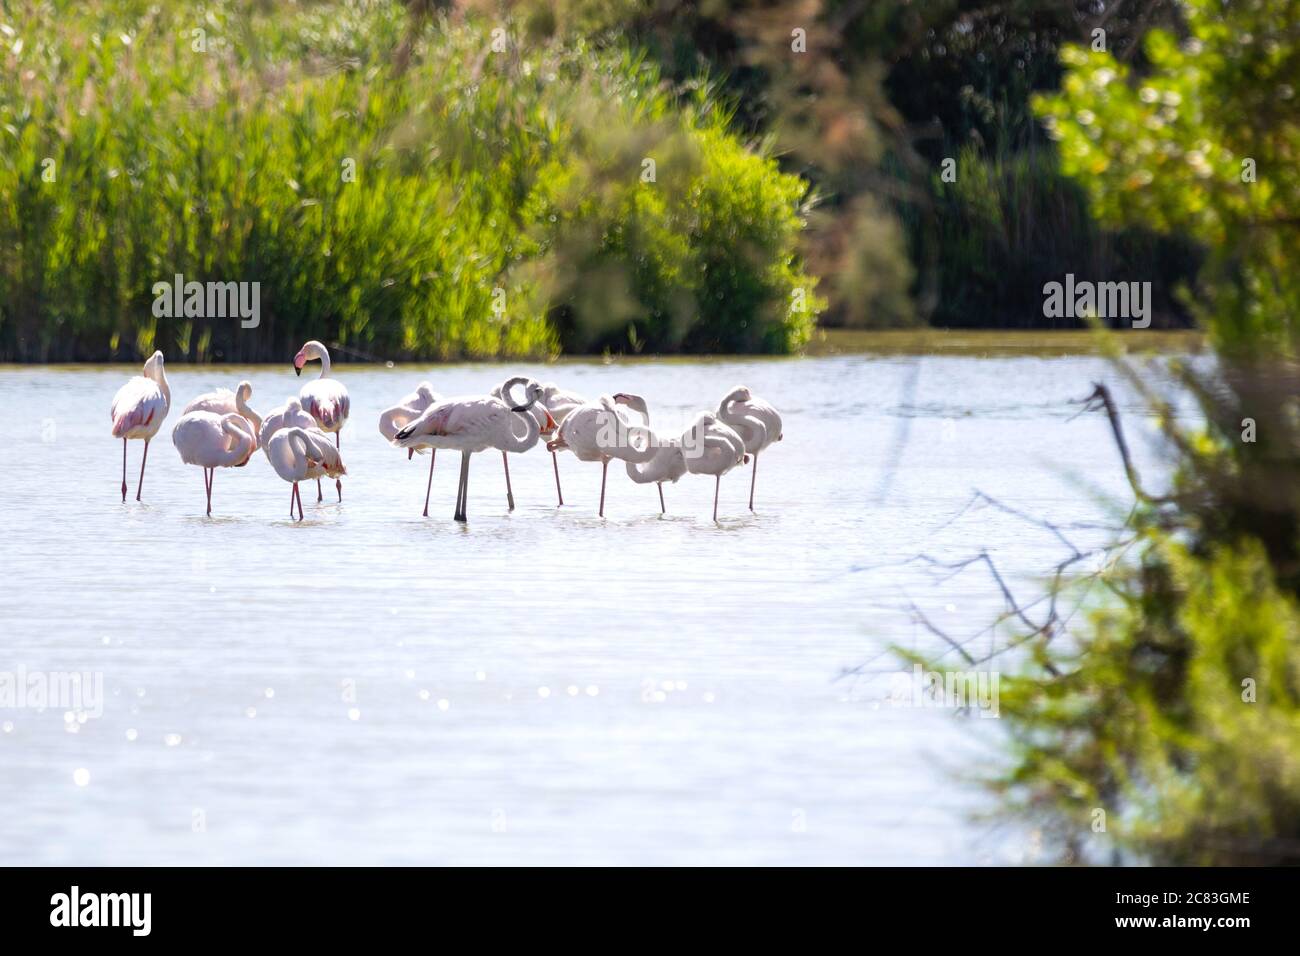 Close up of a flock of pink flamingos standing on one leg on shallow water in a pond surrounded by bushes and vegetation in the early morning light Stock Photo